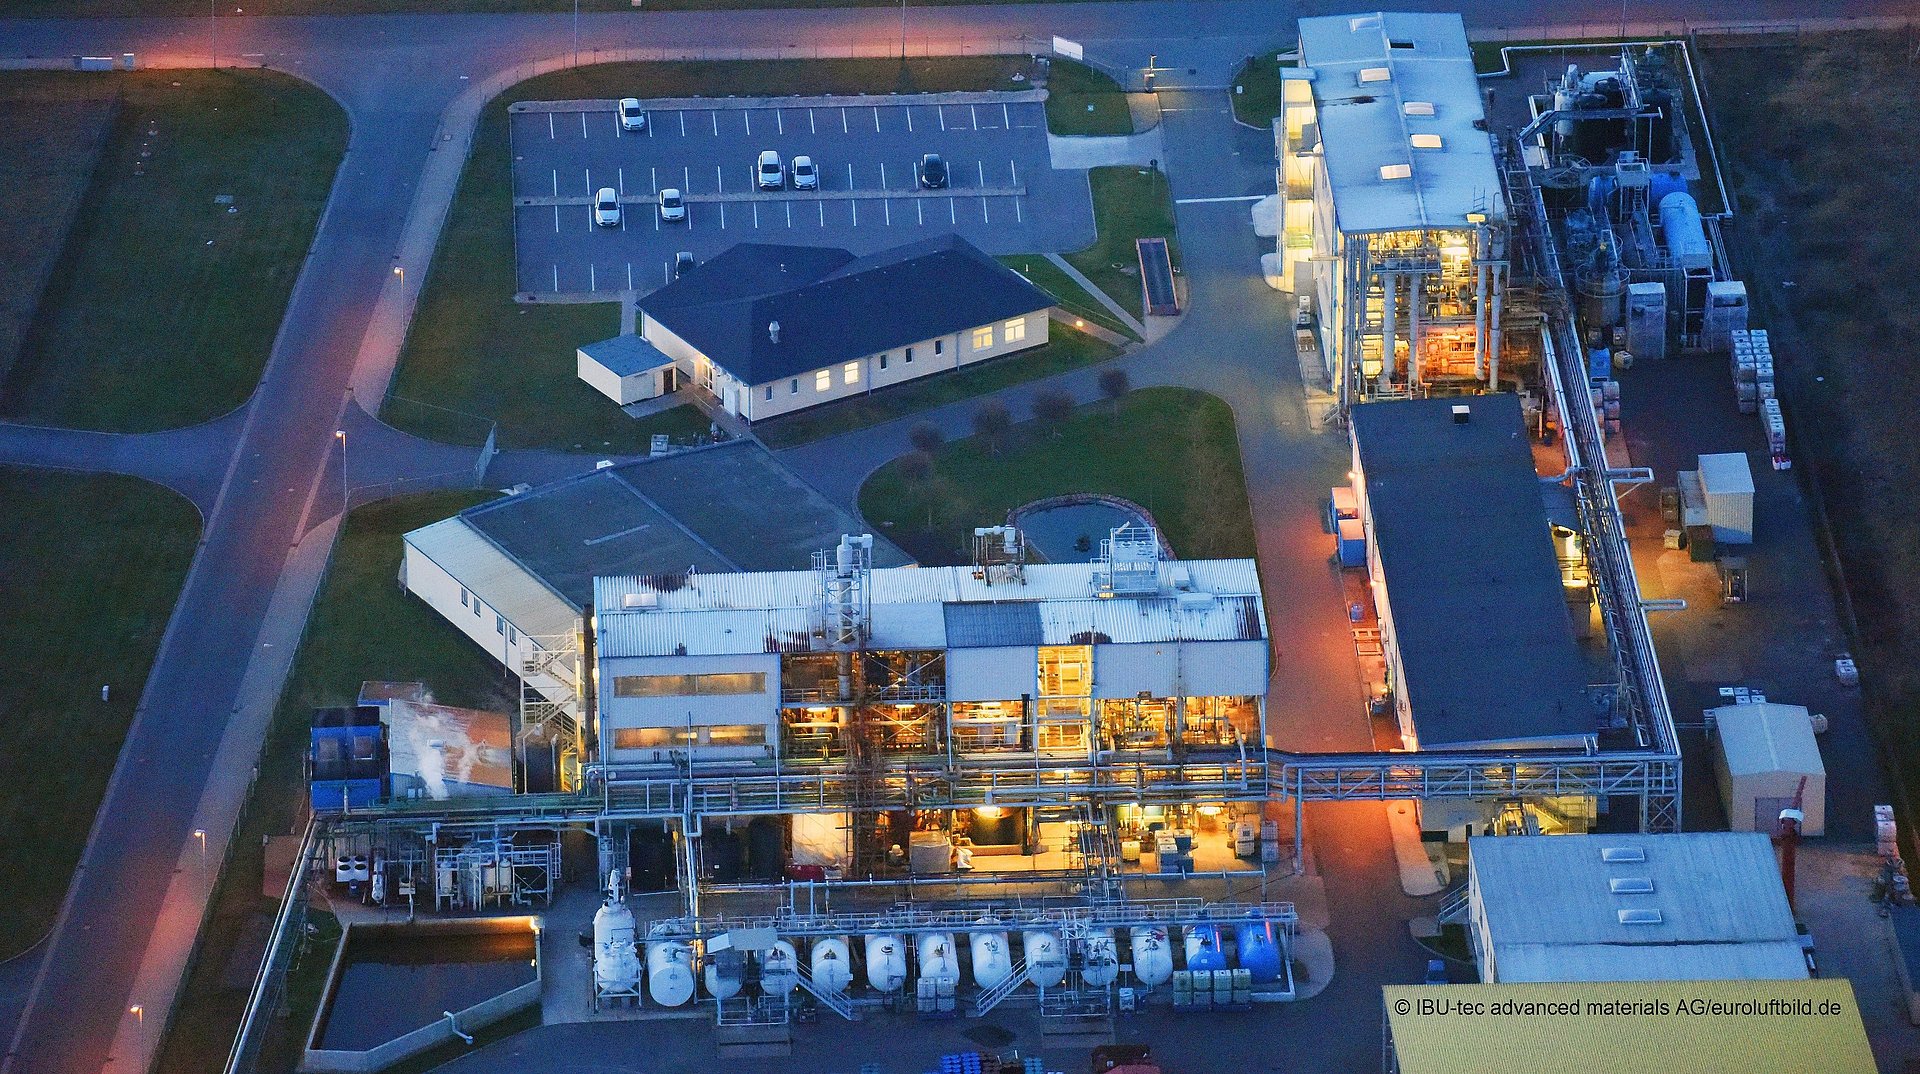 BNT Chemicals of IBU-tec in the chemical park Bitterfeld Wolfen